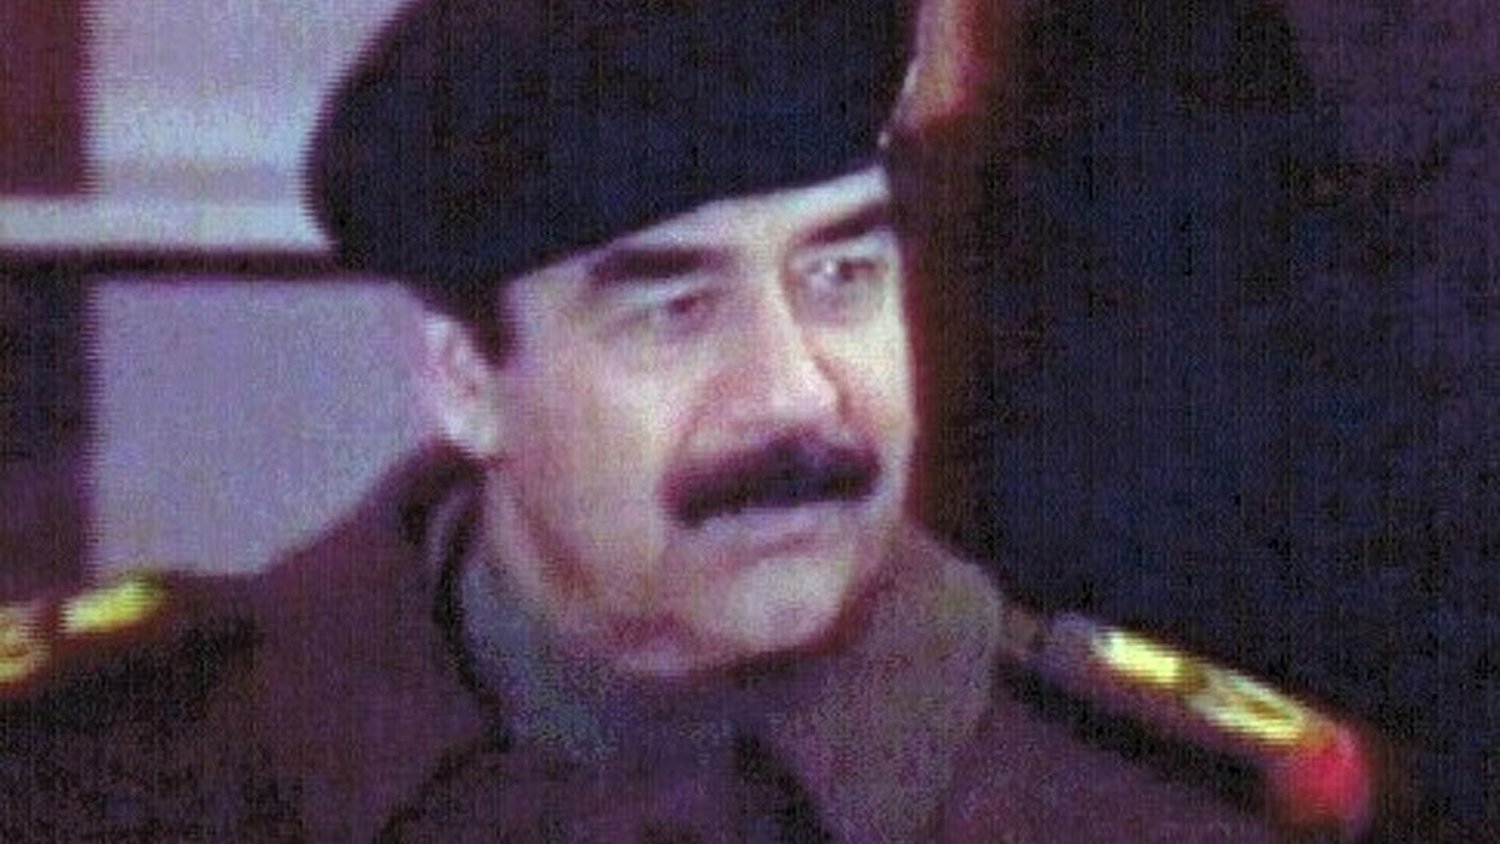 pictures of saddam hussein capture pictures